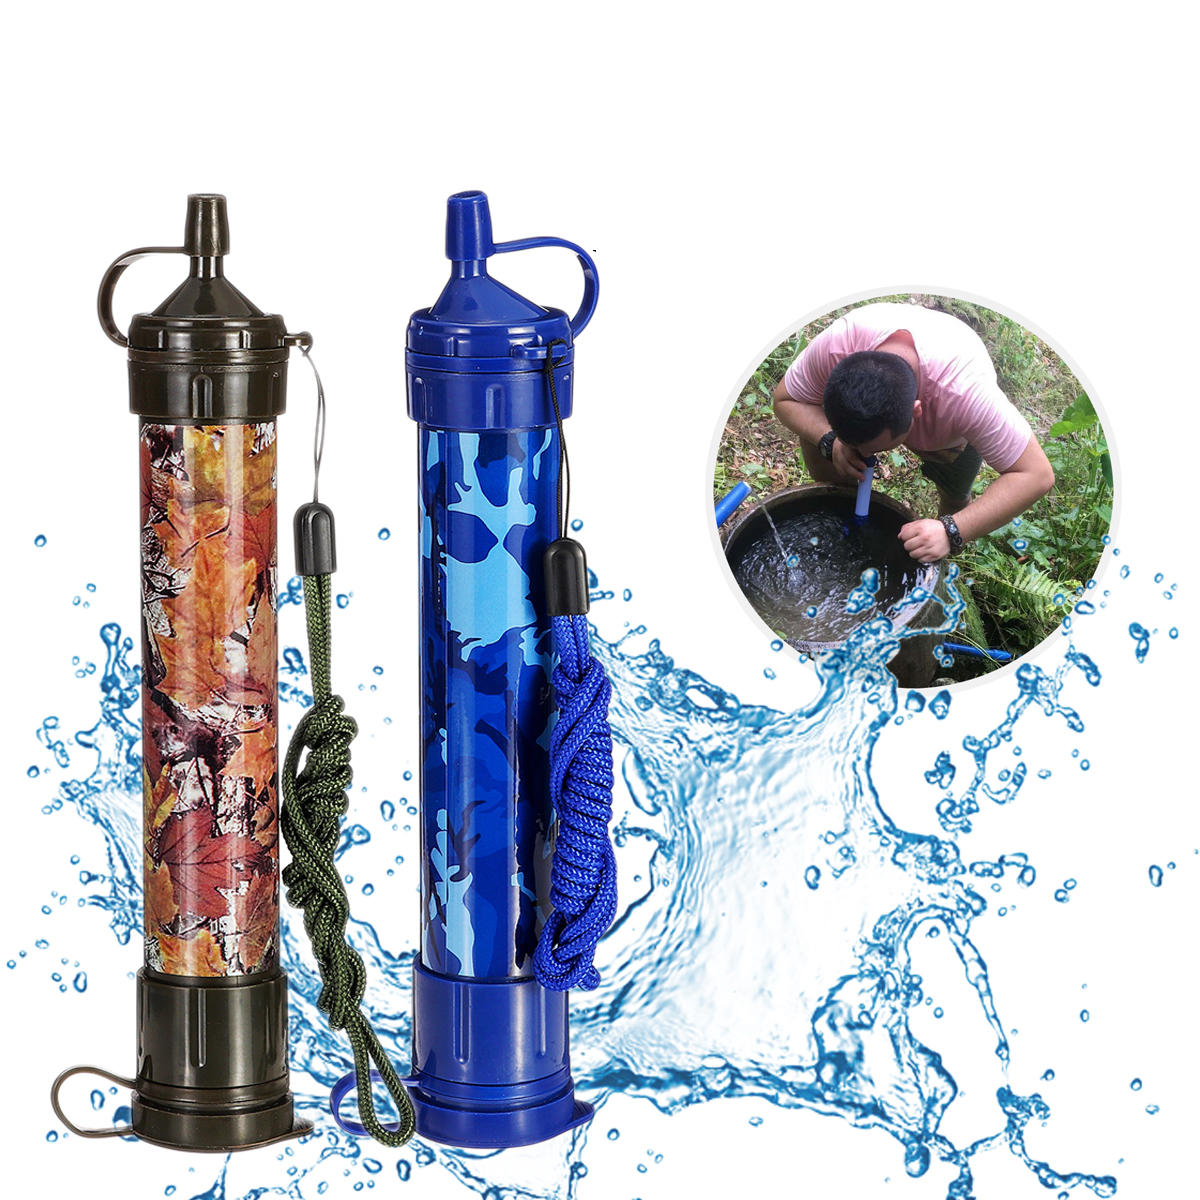 

Portable Outdoor Emergency Water Filter Straw Hiking Survival Drinking Camping